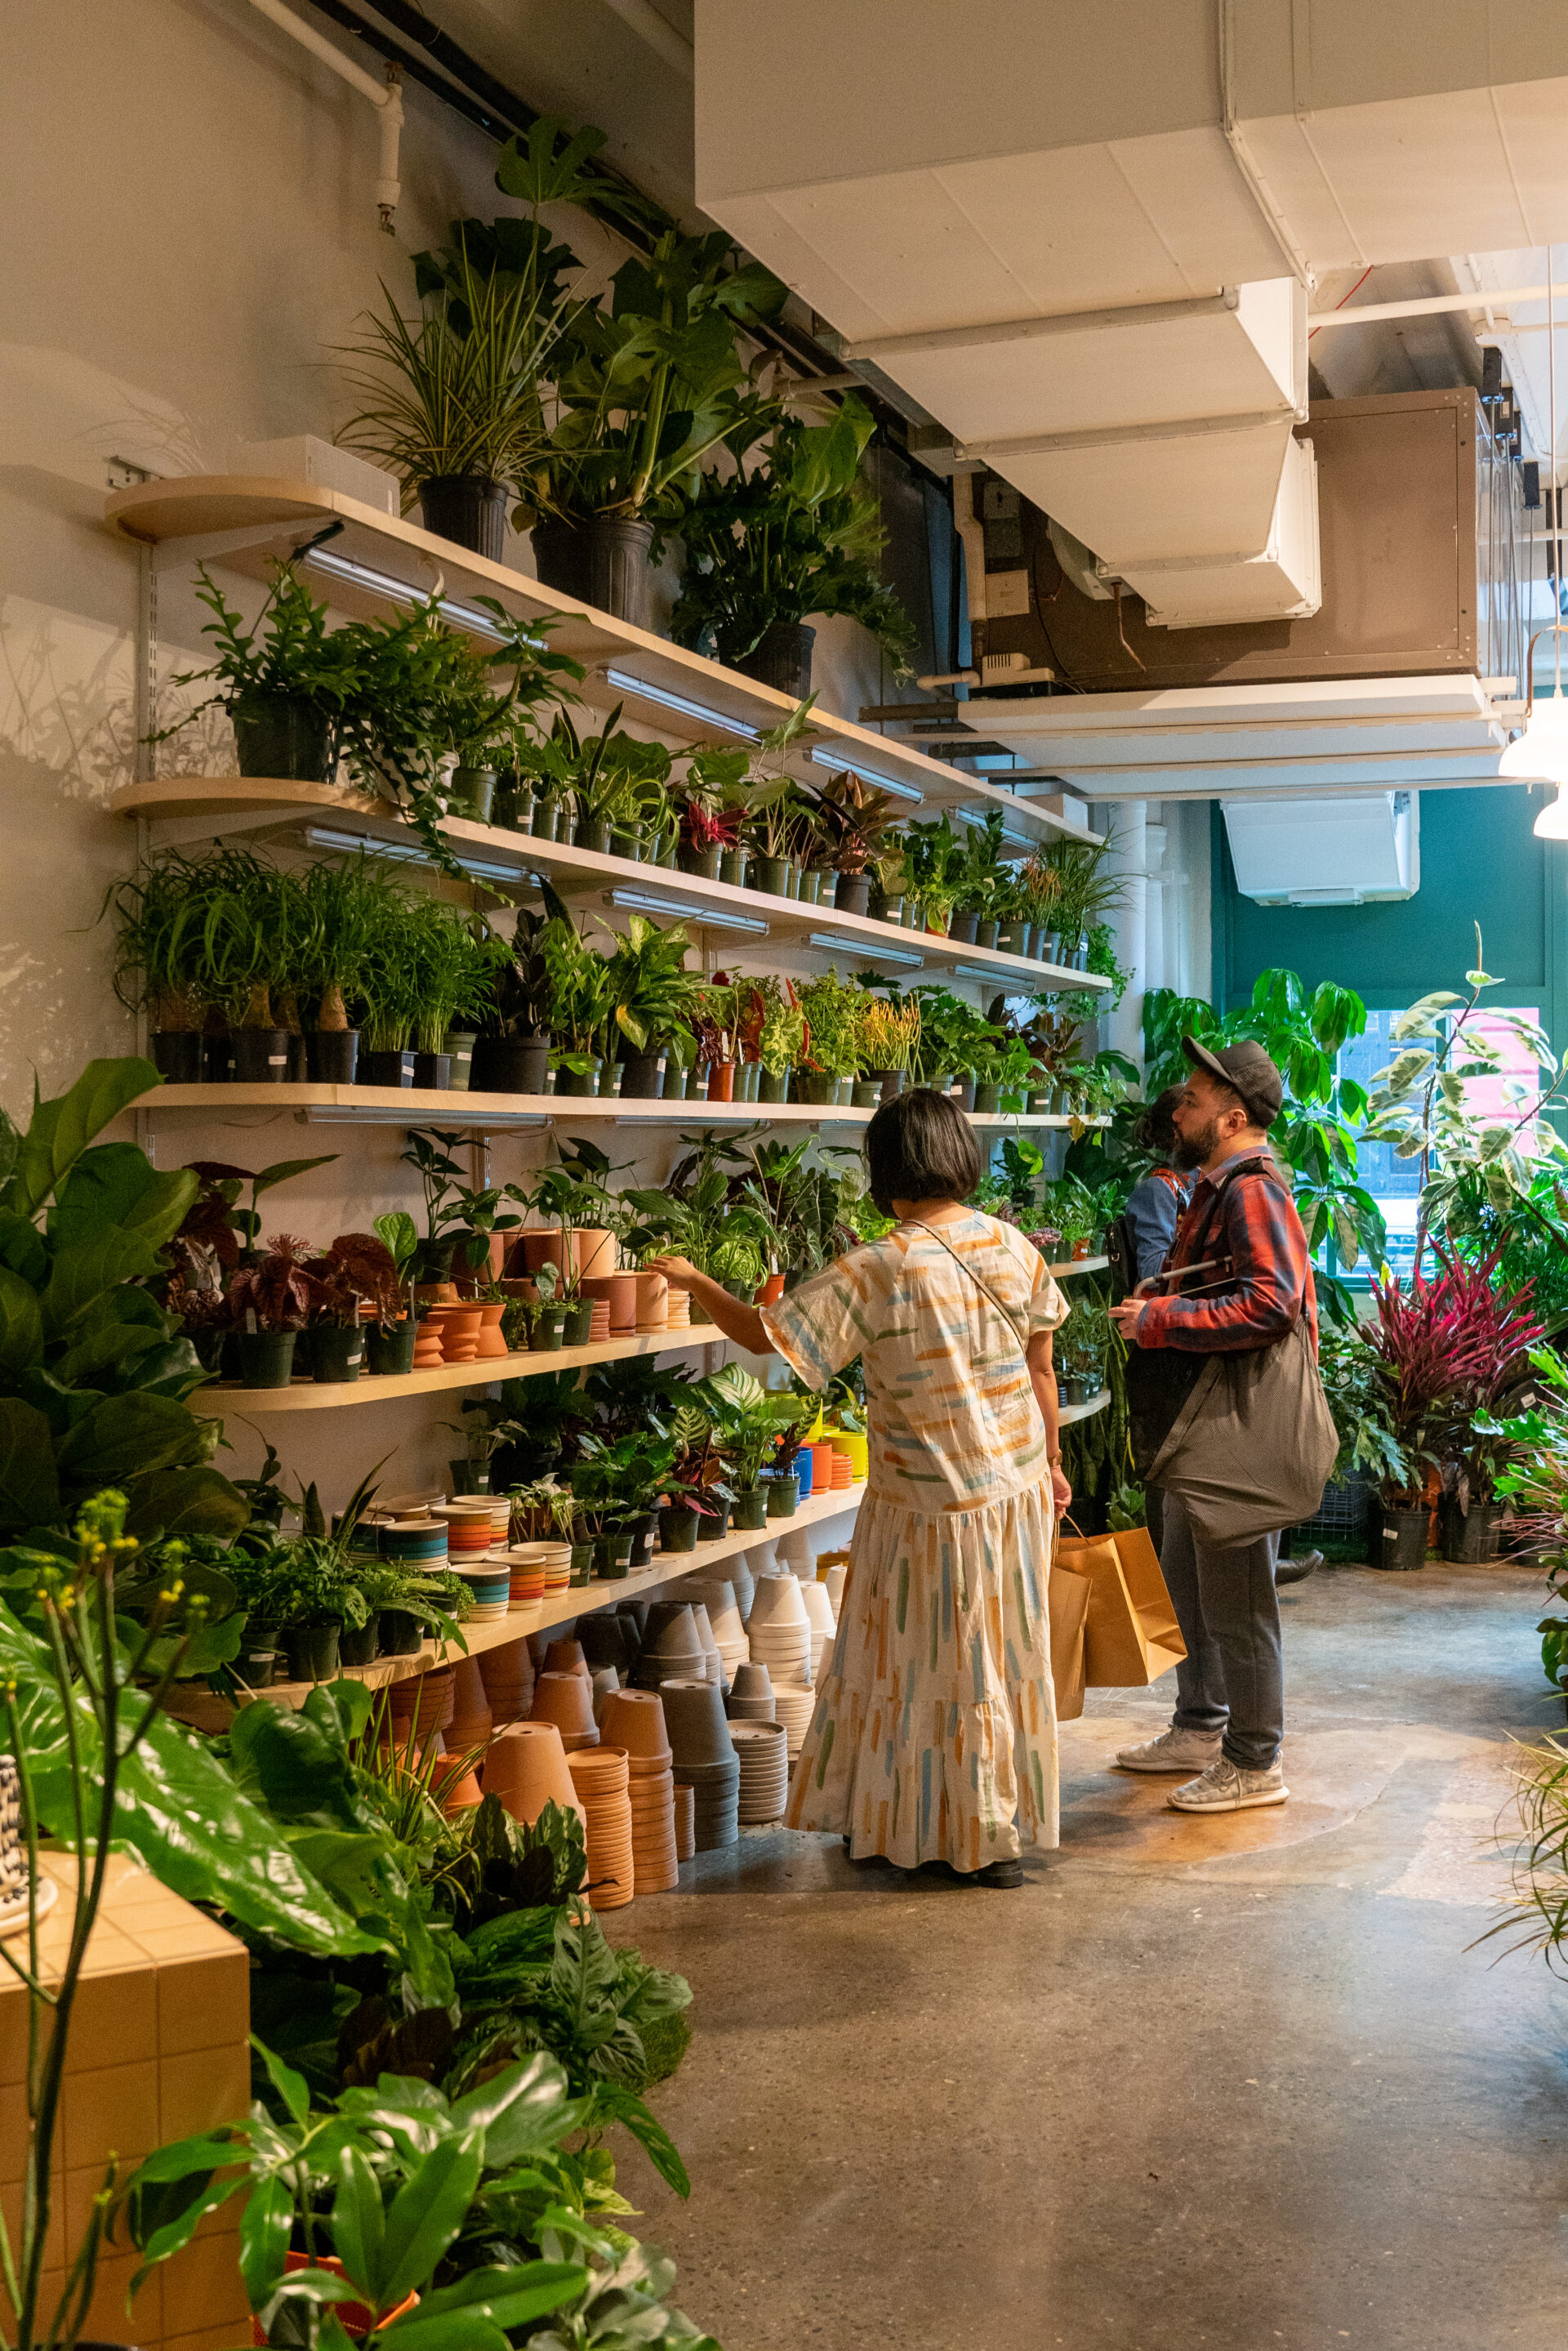 People are shopping in a plant store.